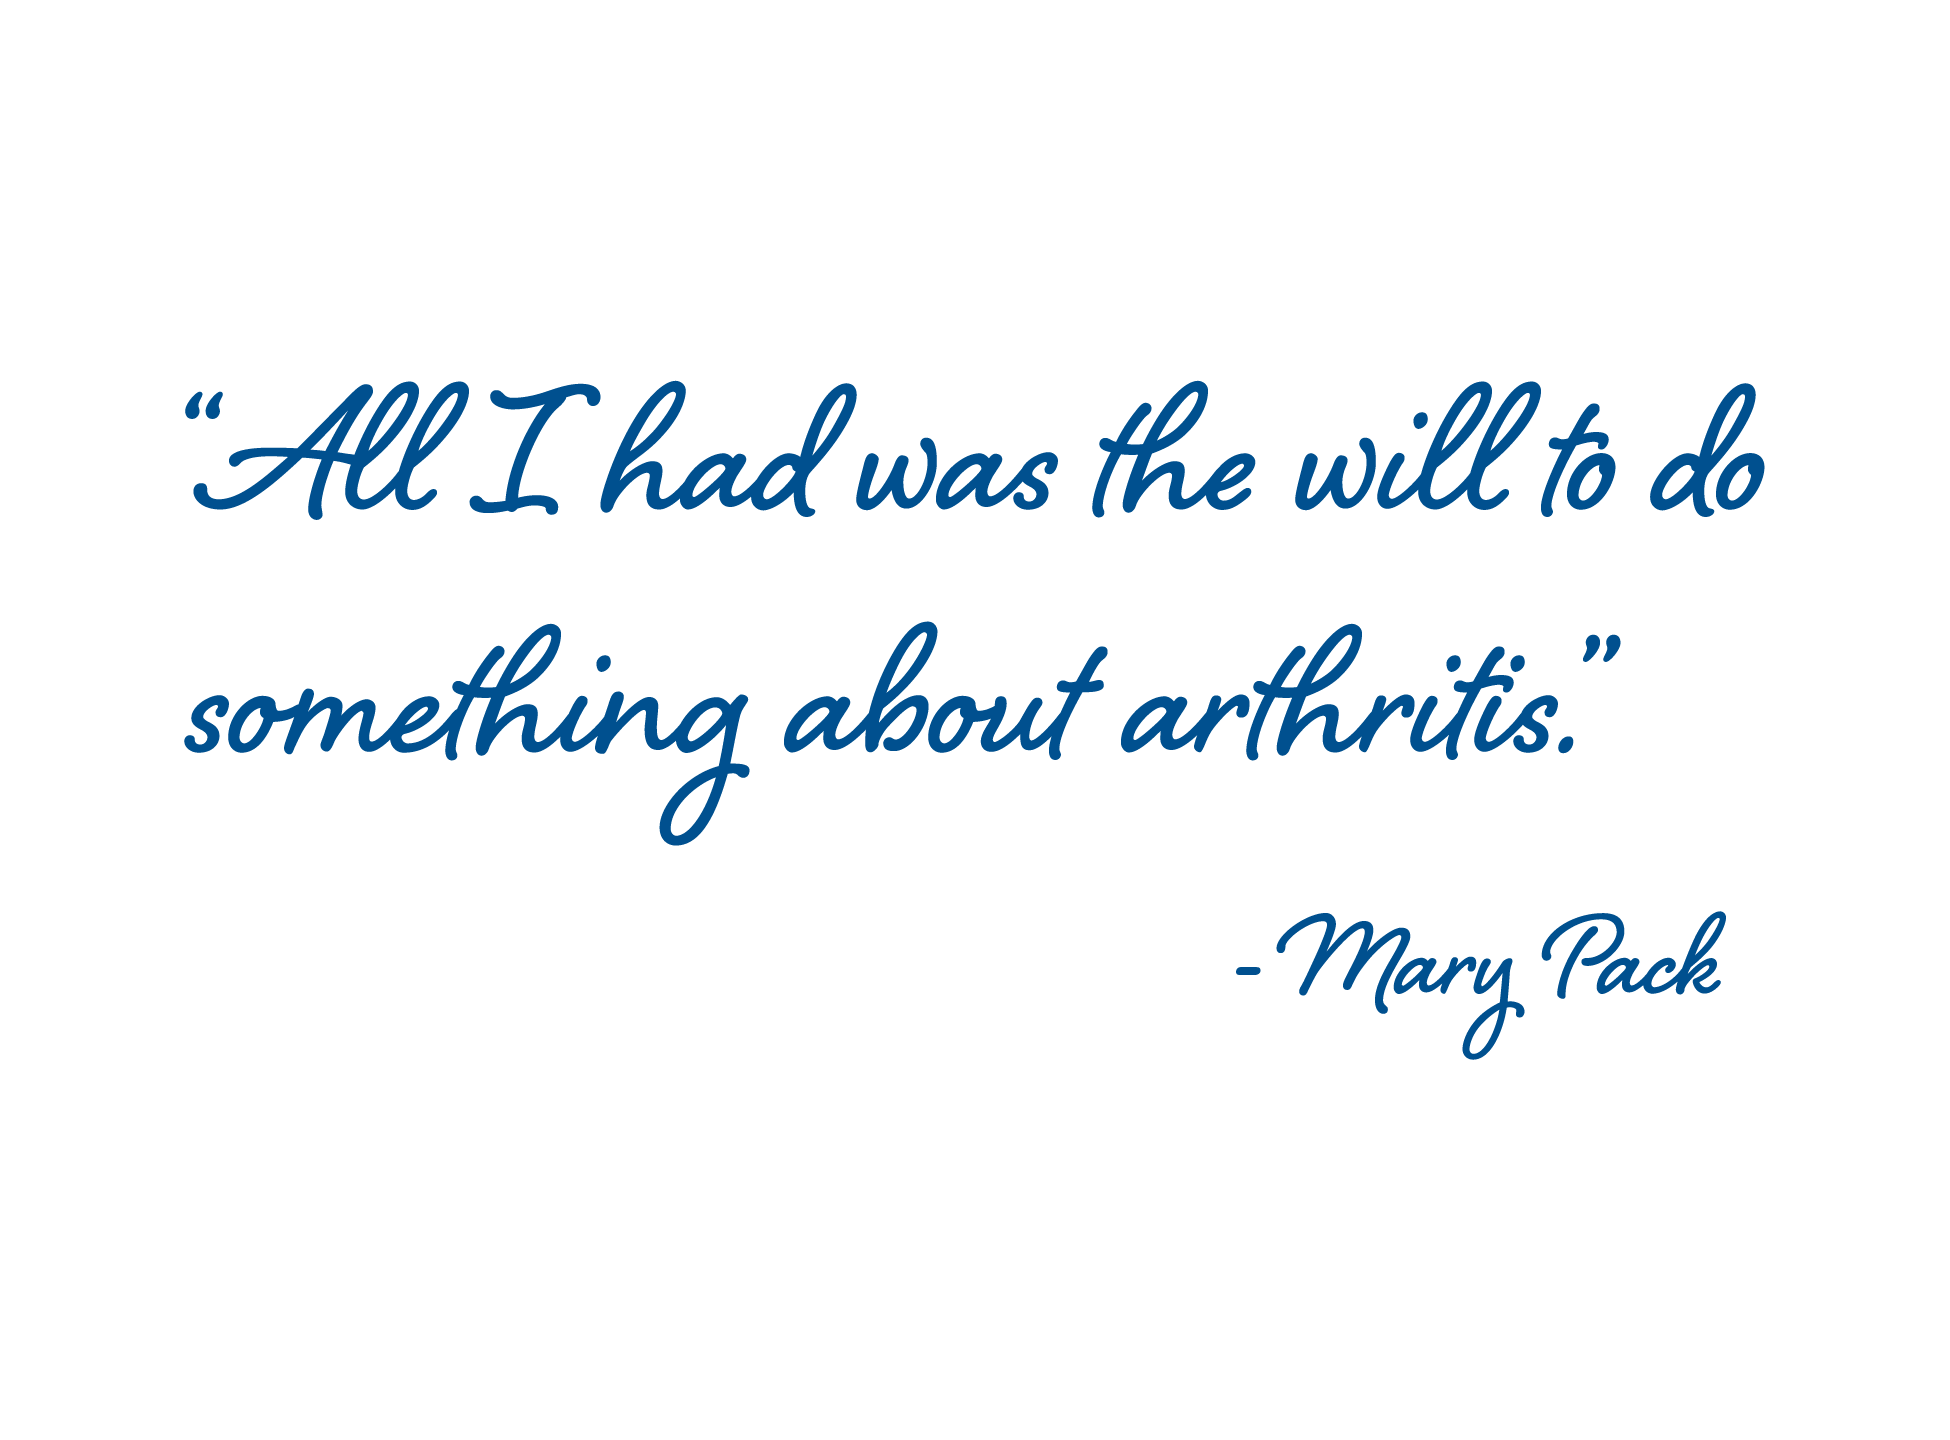 Quote: All I had was the will to do something about arthritis by Mary Pack